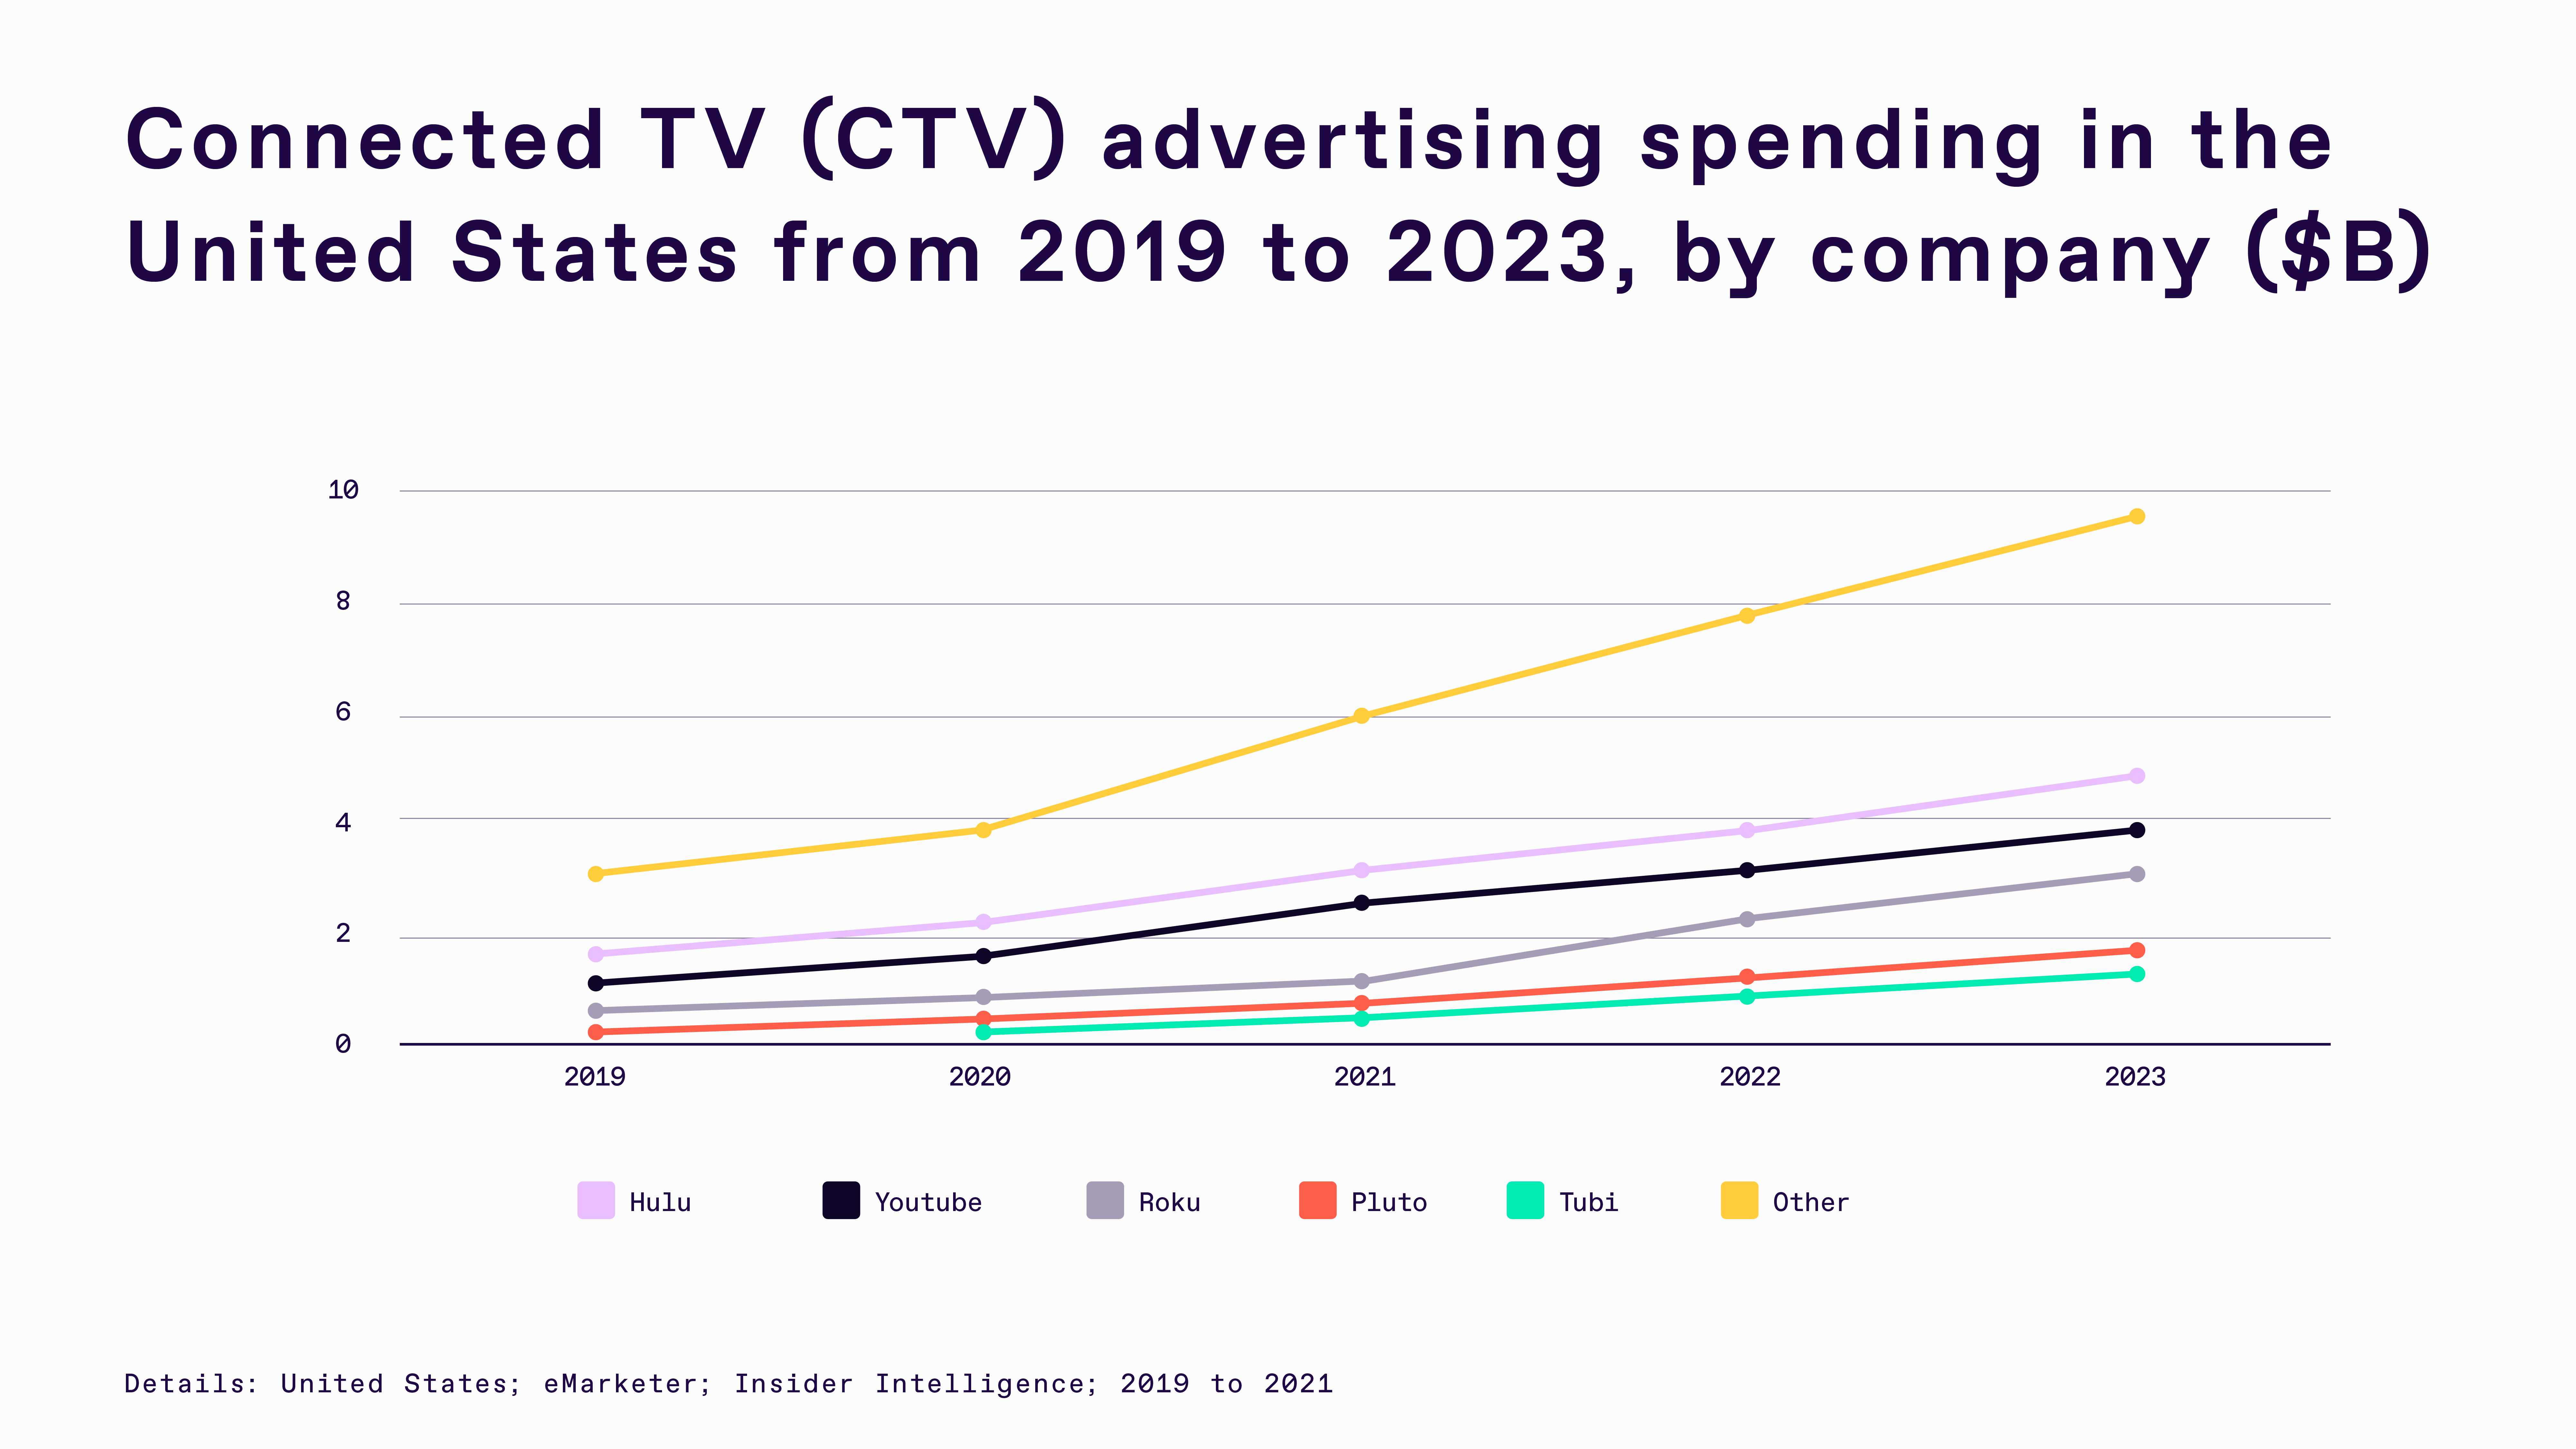 Chart showing connected TV (CTV) advertising spending in the United States from 2019 to 2023, by company (including Hulu, YouTube, Roku, Pluto, Tubi and an 'other' category) 